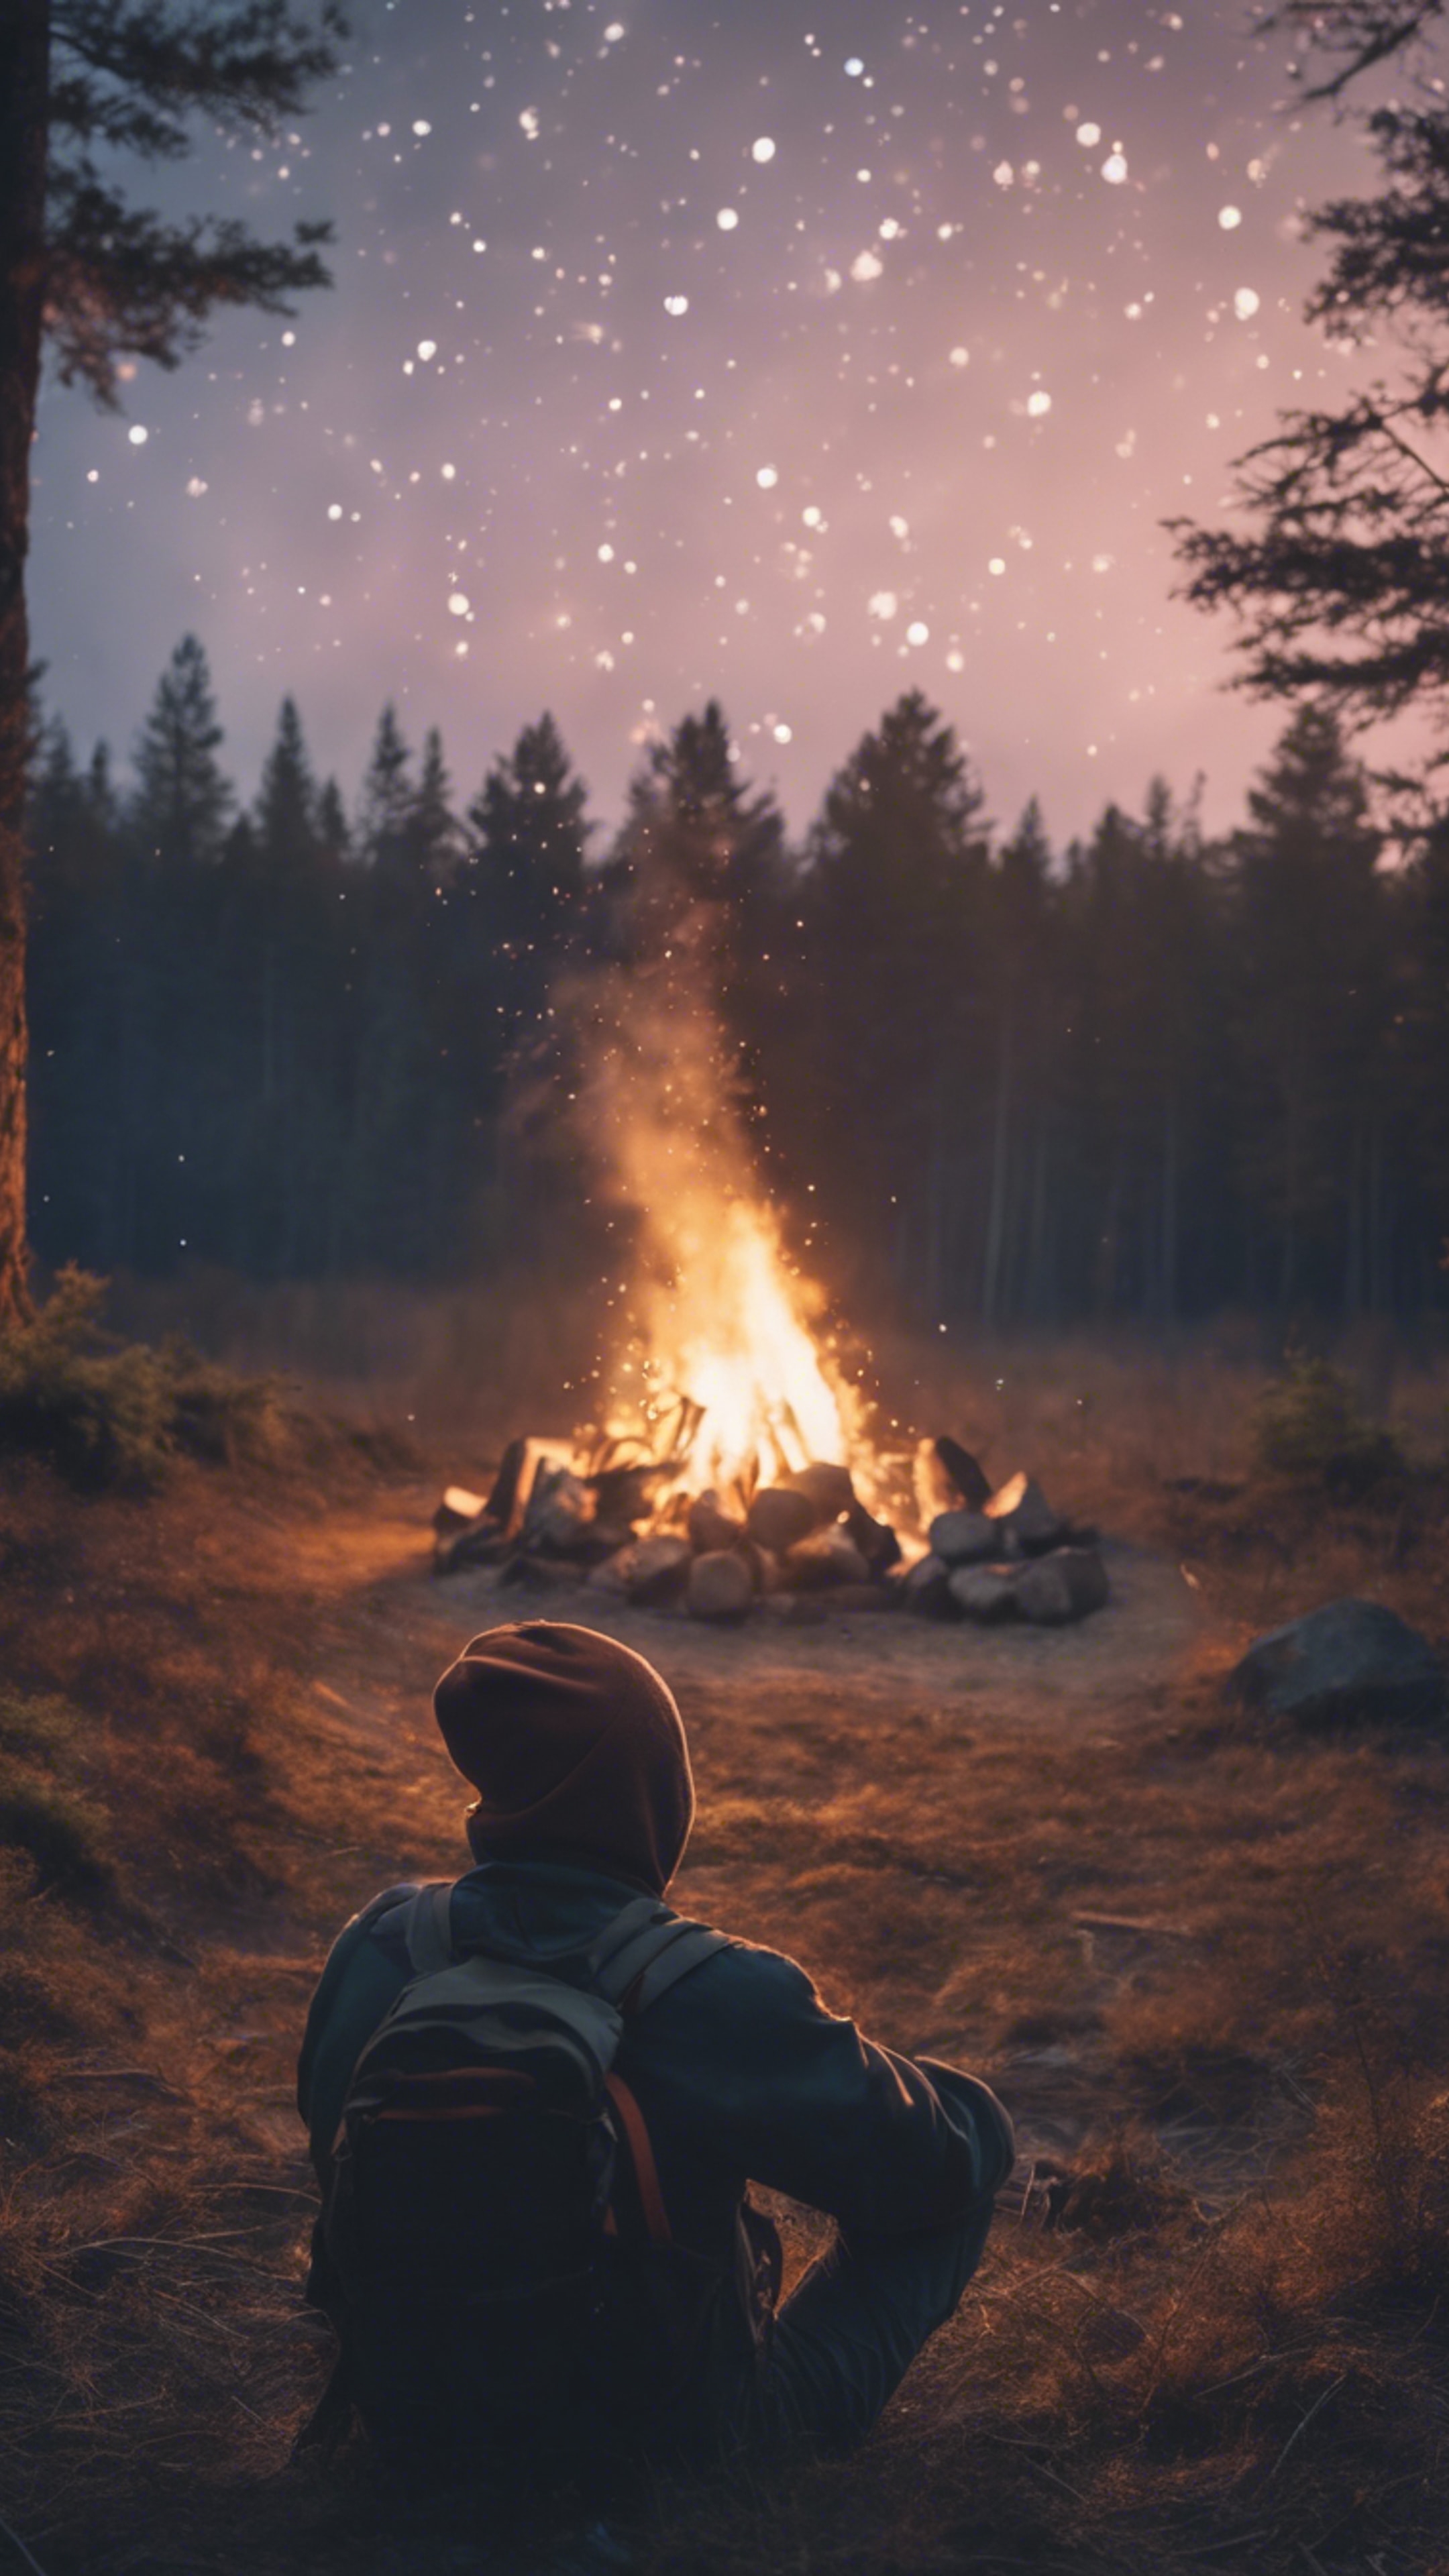 A seated man feeling the warmth of a bonfire while camping under a starlit sky in a peaceful forest. Wallpaper[8fa4d32627b44c4a887d]